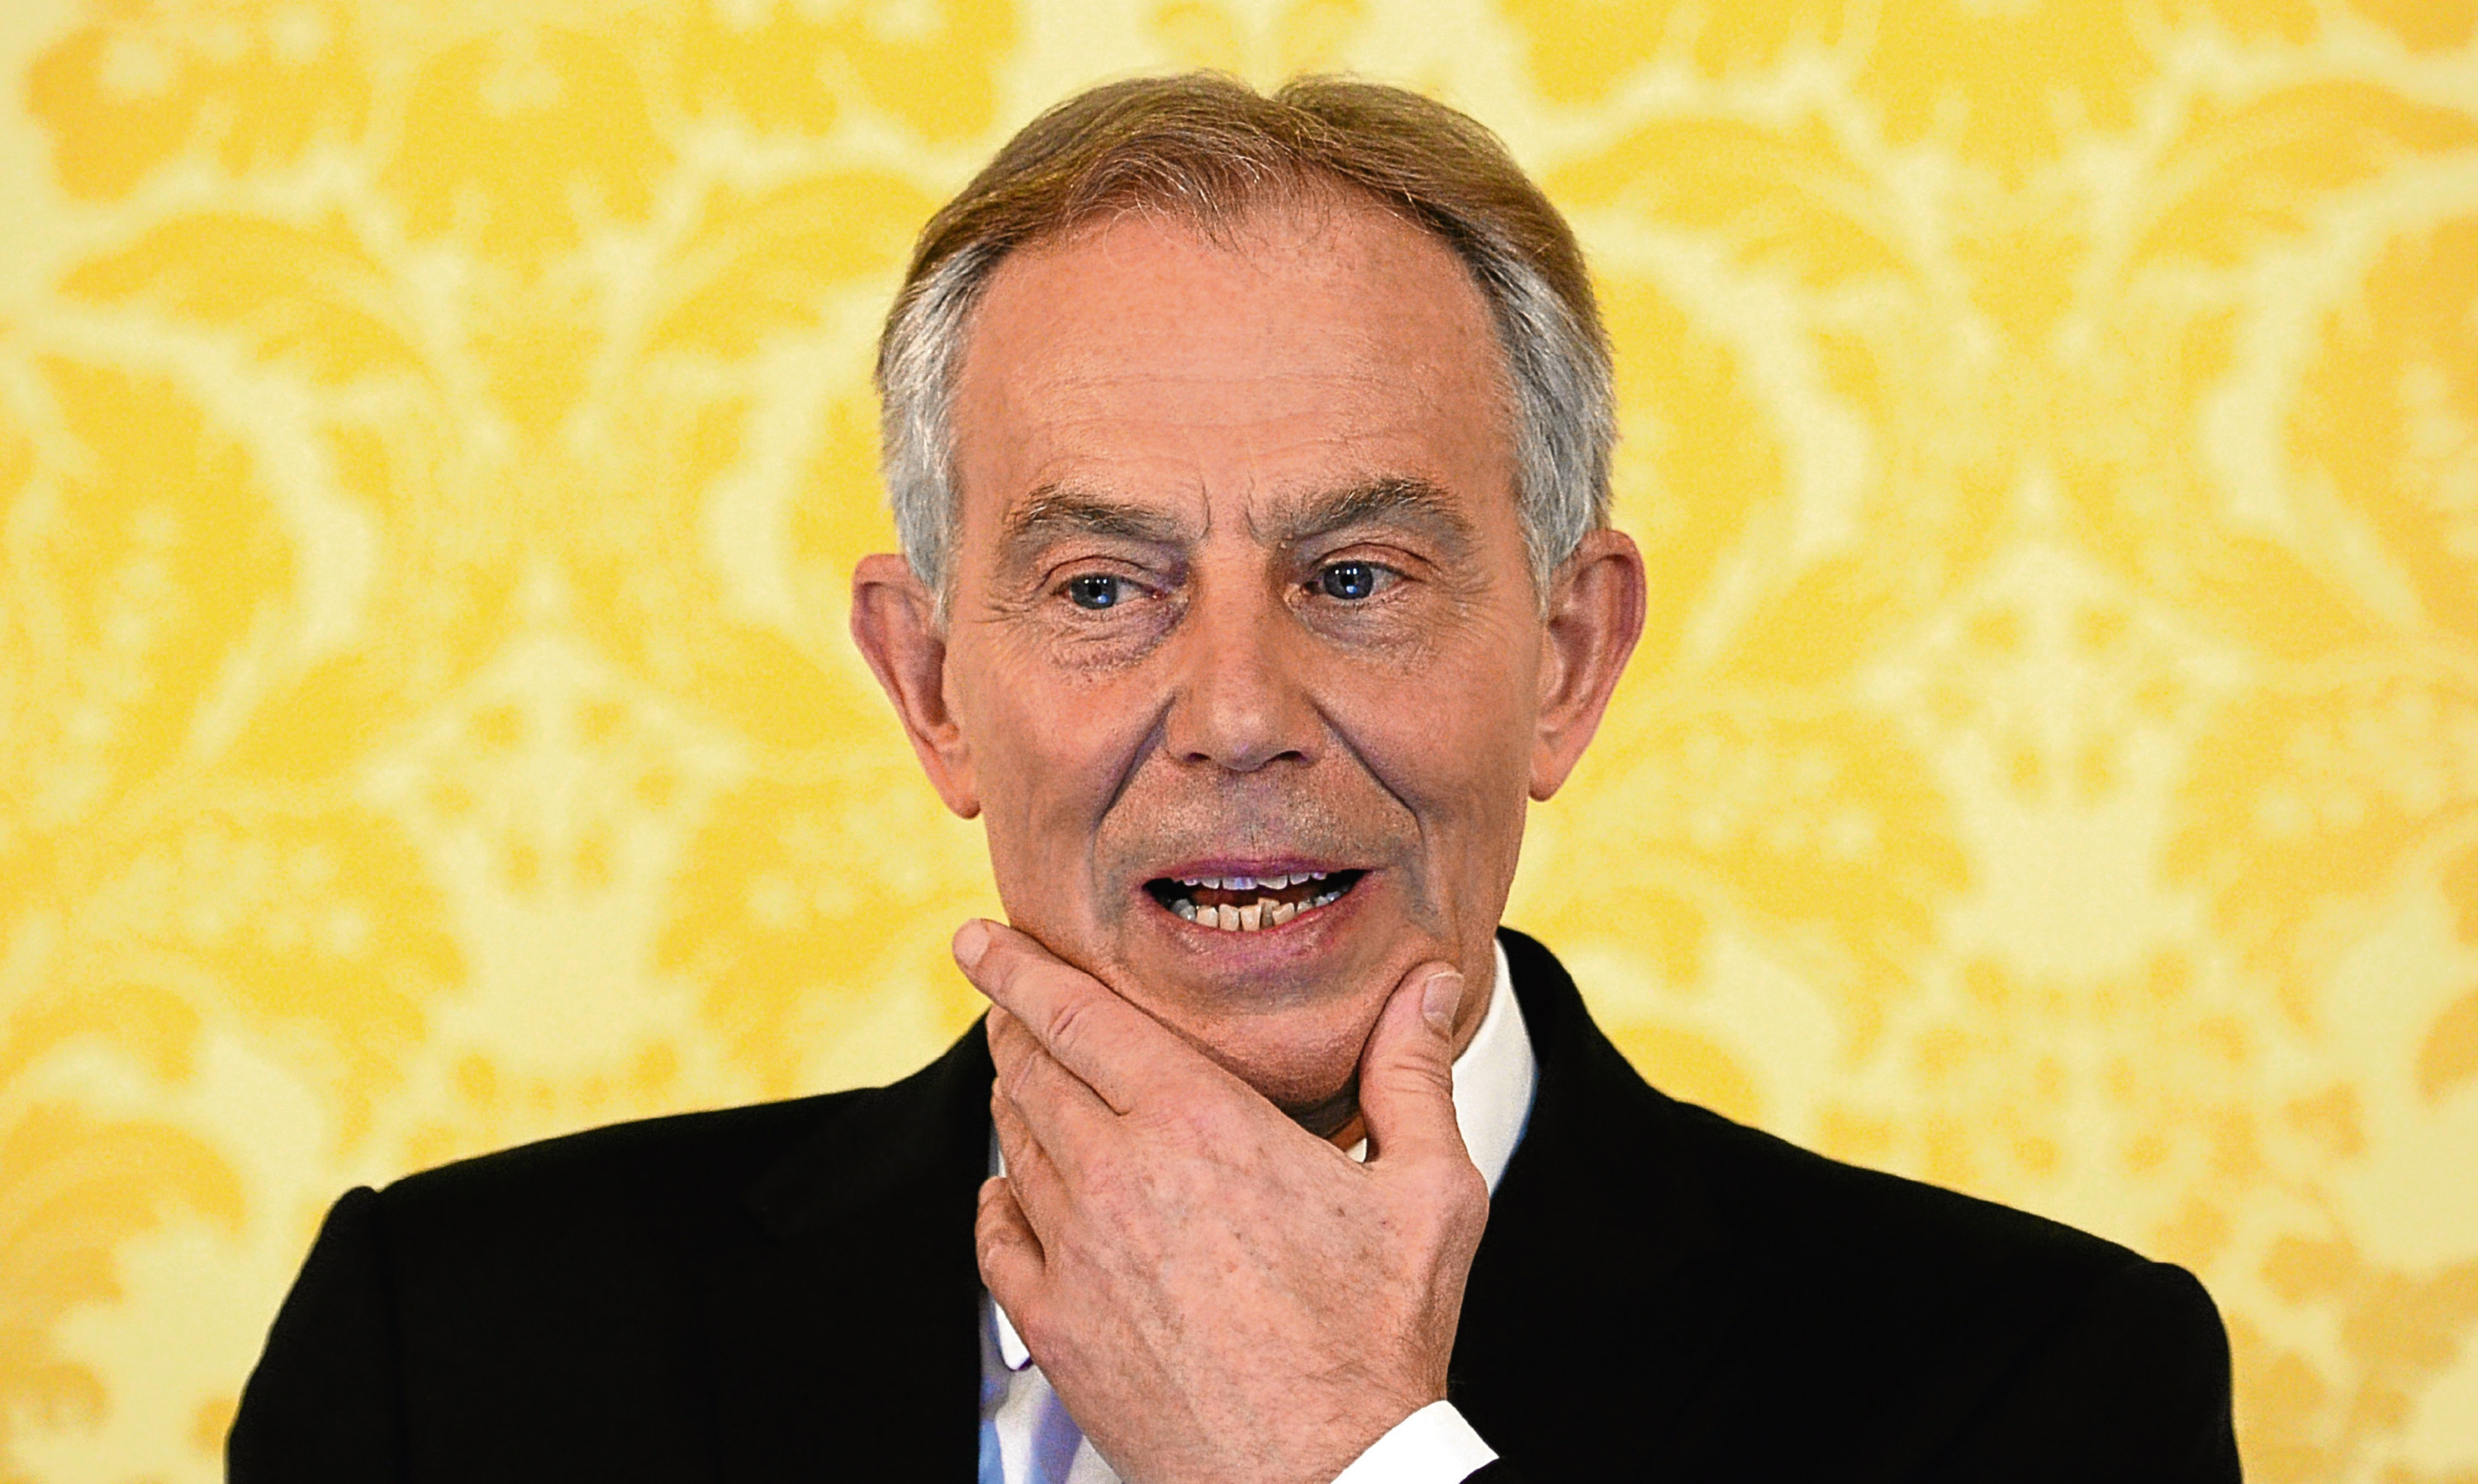 Former Prime Minister Tony Blair reacts to the Chilcot Report.